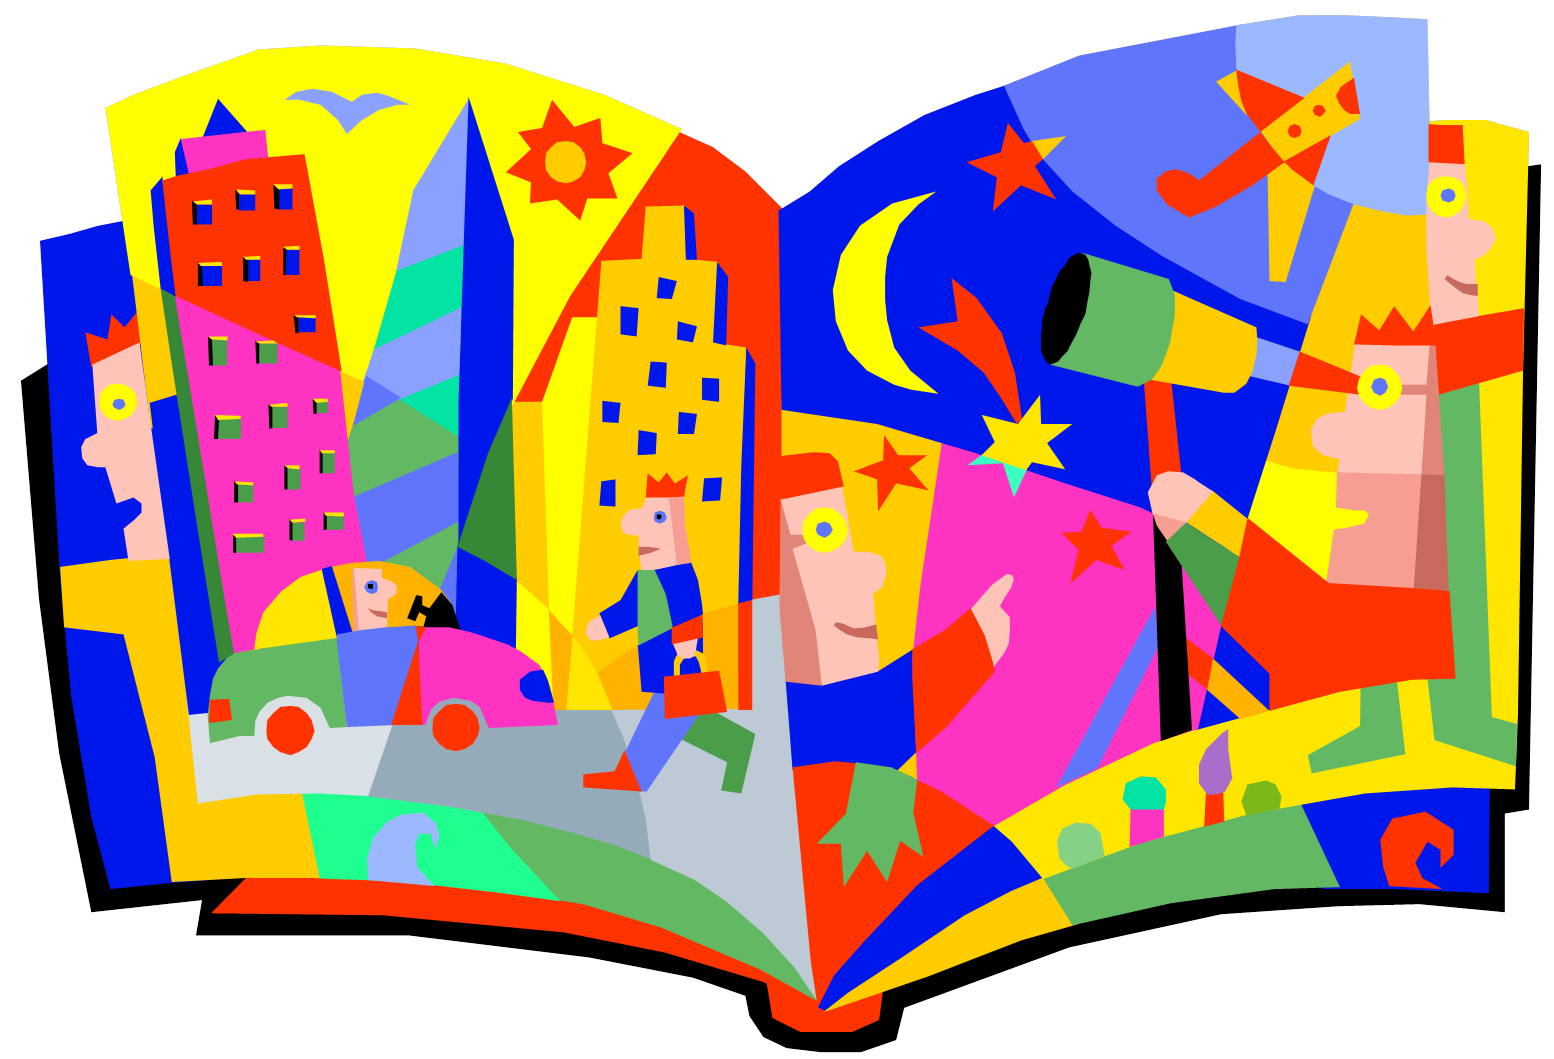  picture books your. Storytime clipart anecdote